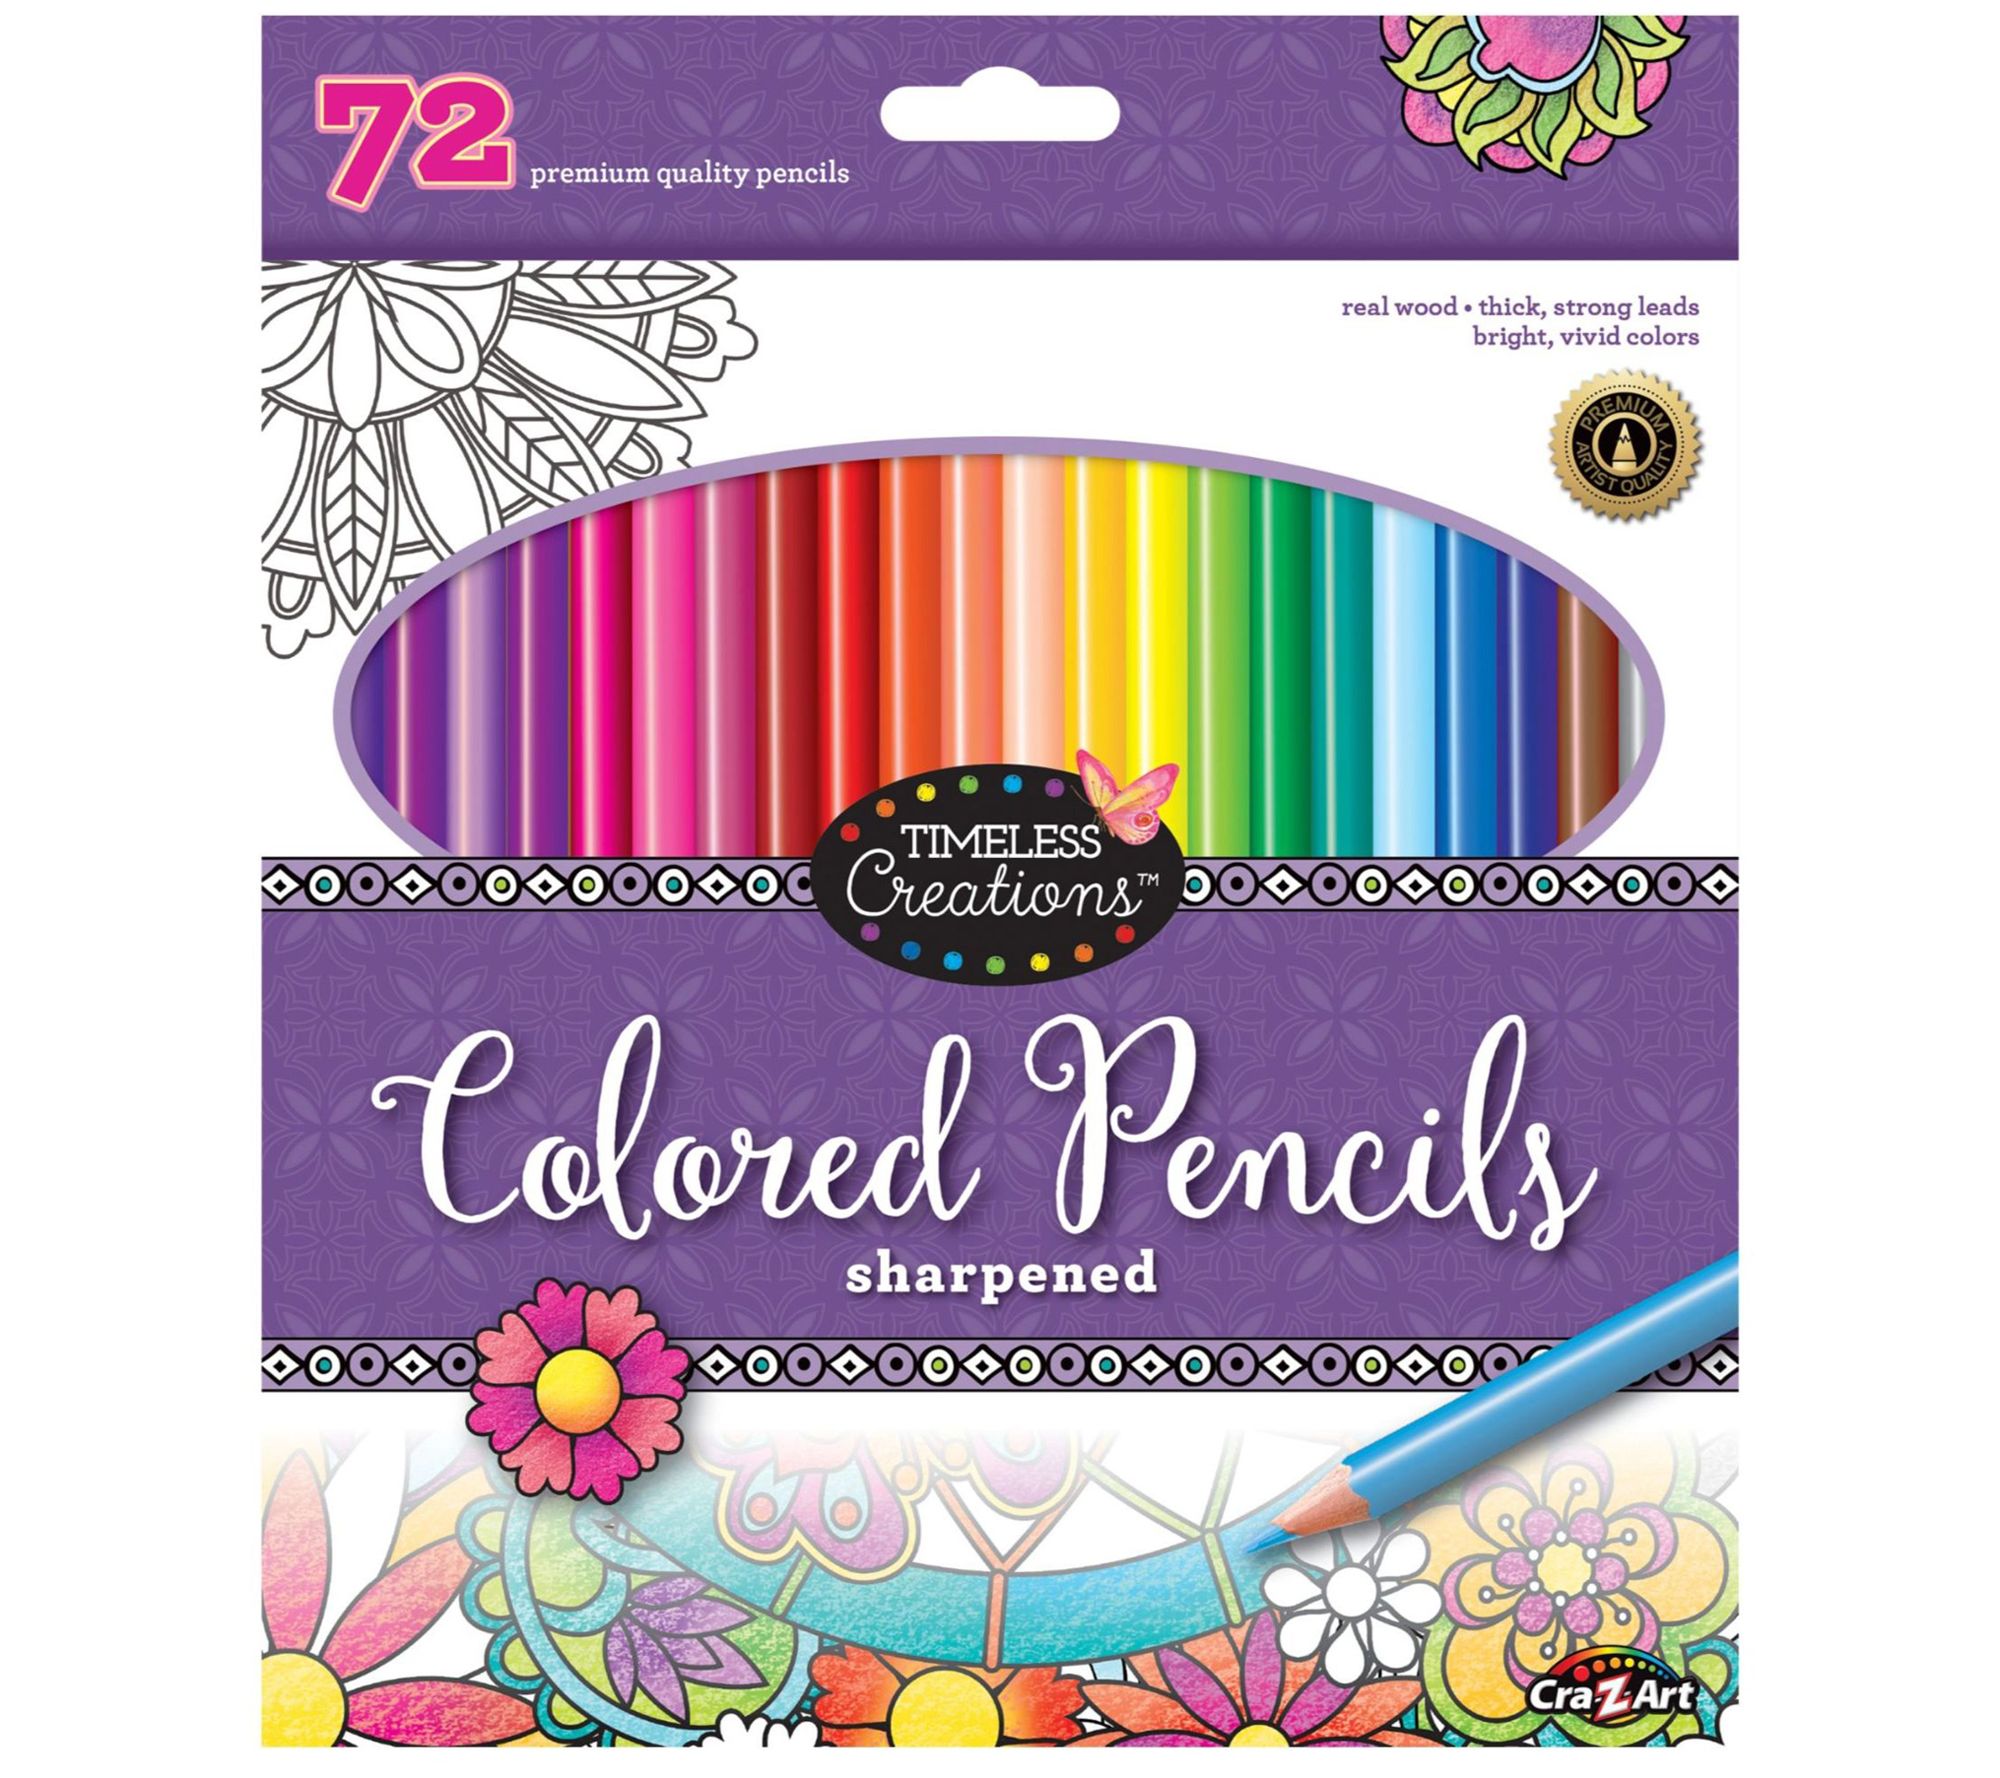 Studio Series Skin Tone Colored Pencils (Set of 24) by Peter